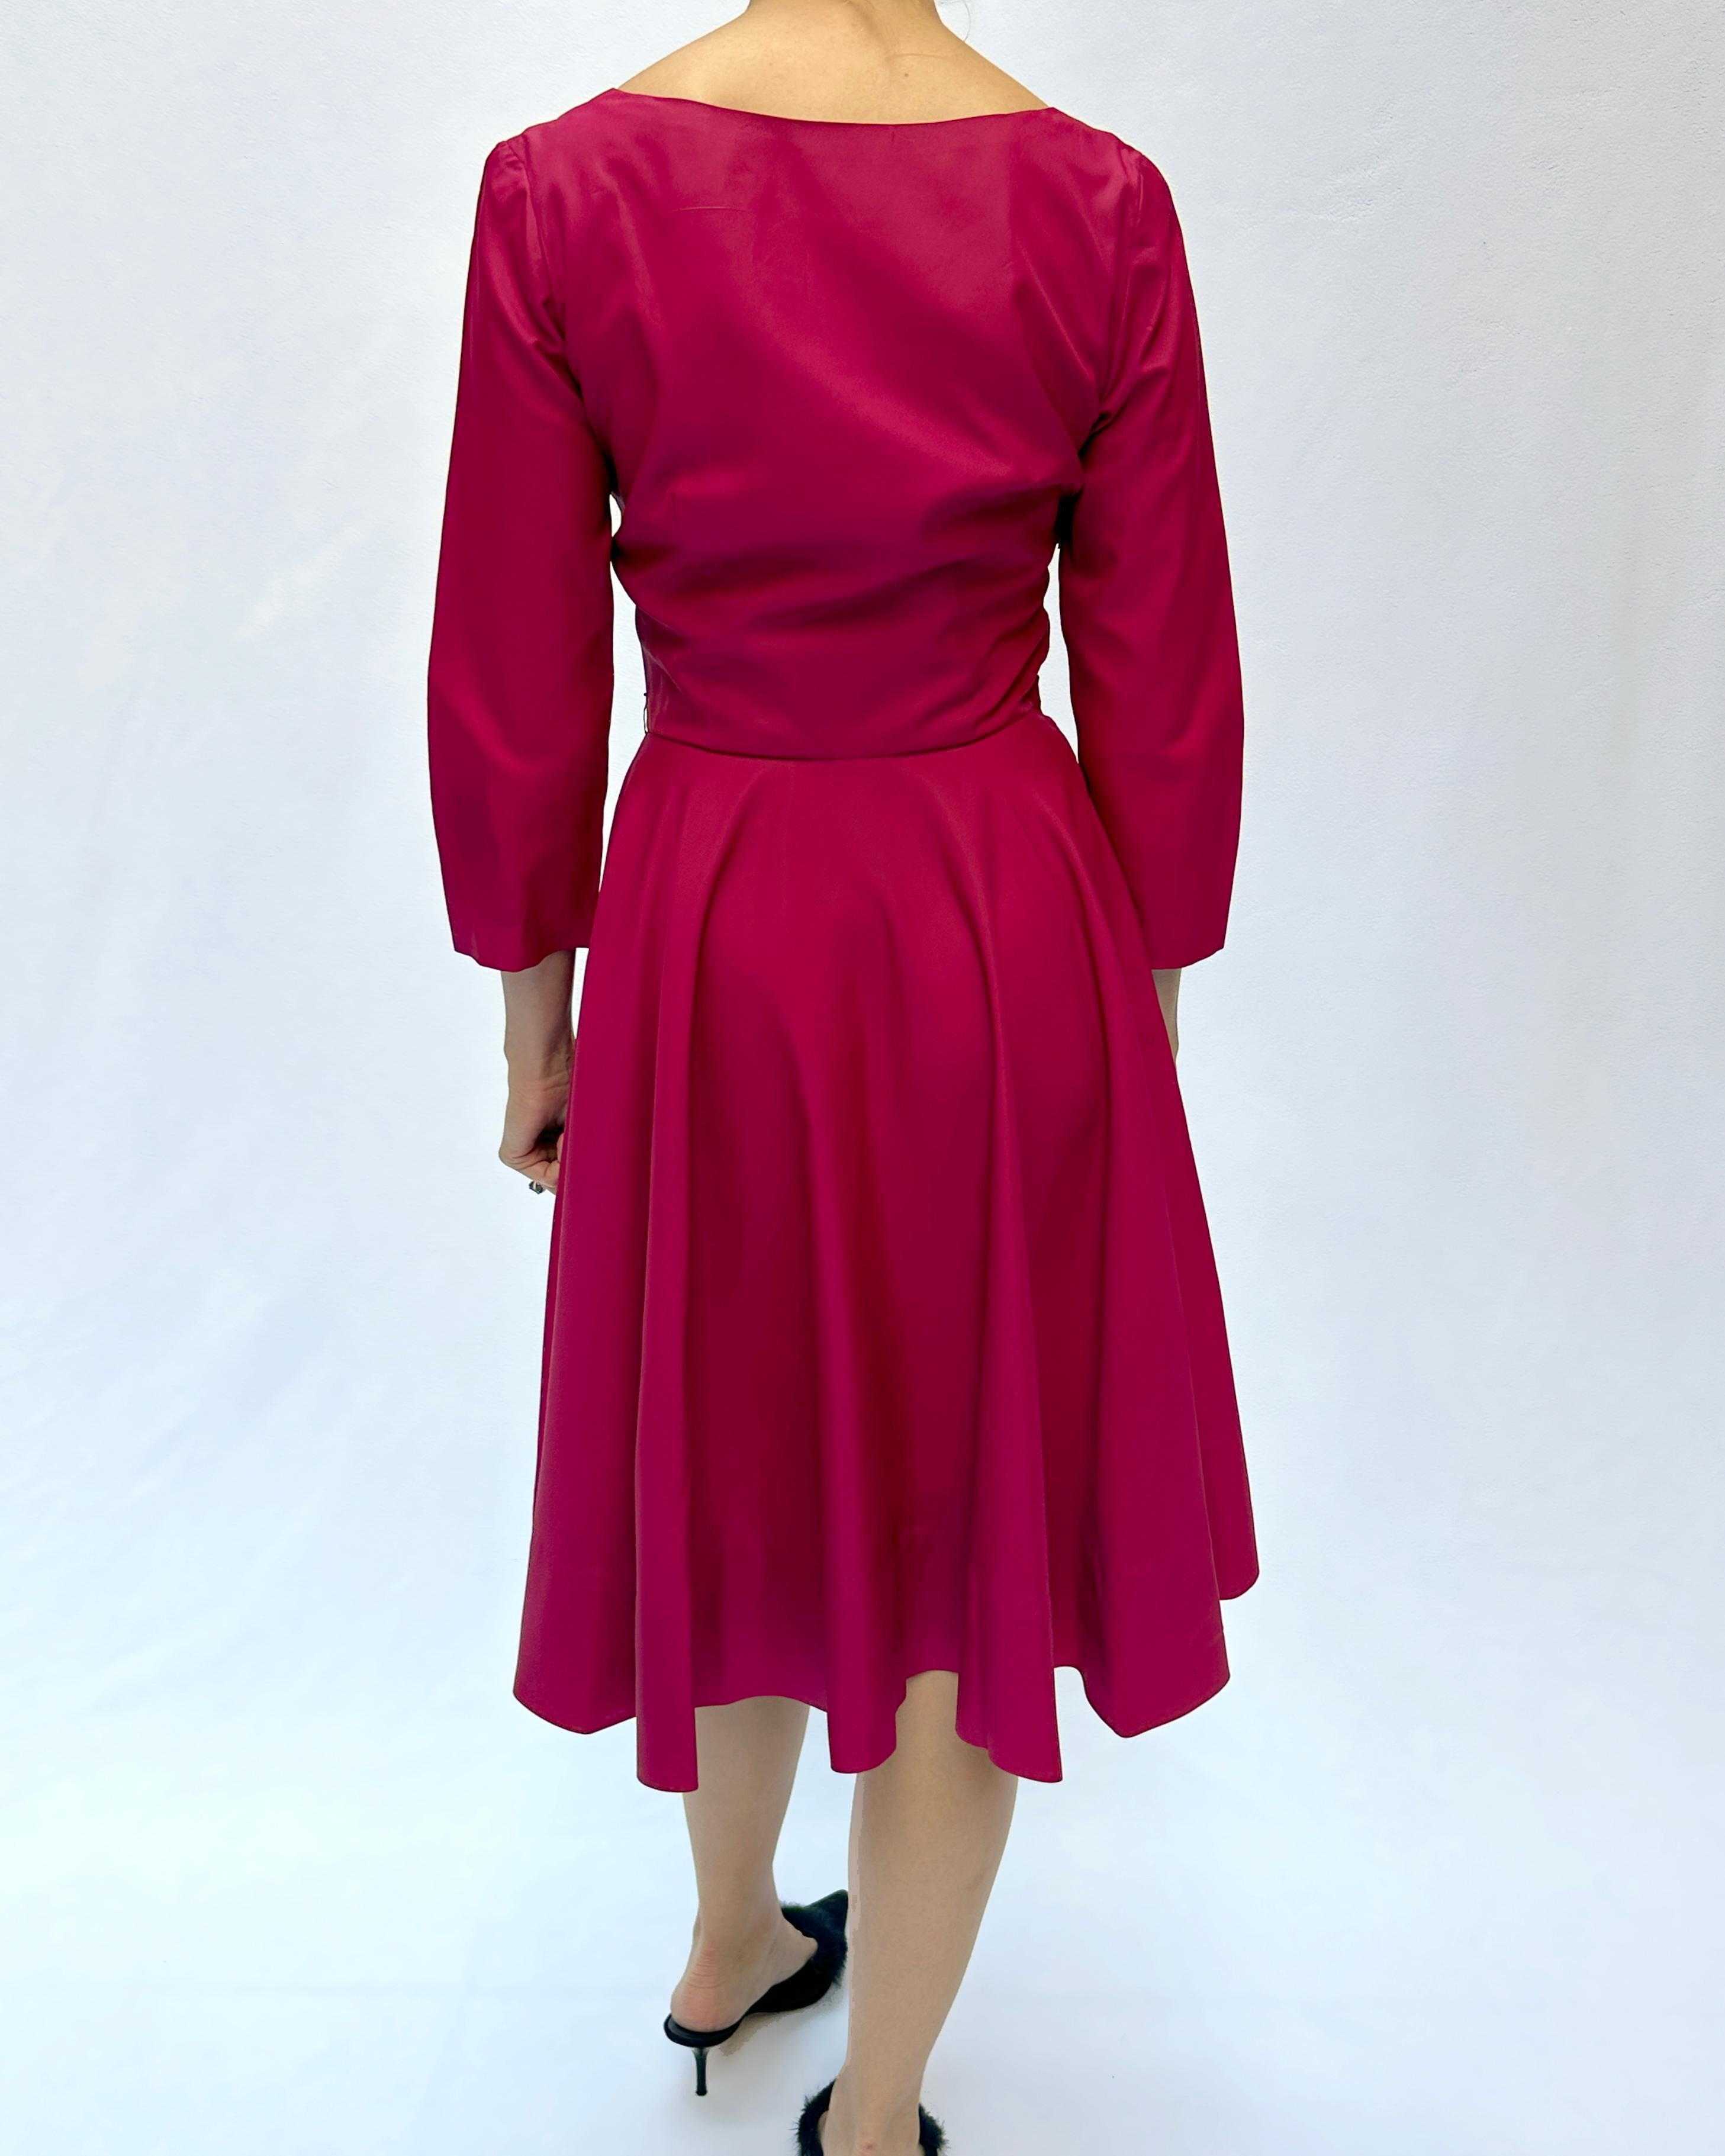 VINTAGE 1950s FIT AND FLARE DRESS For Sale 7